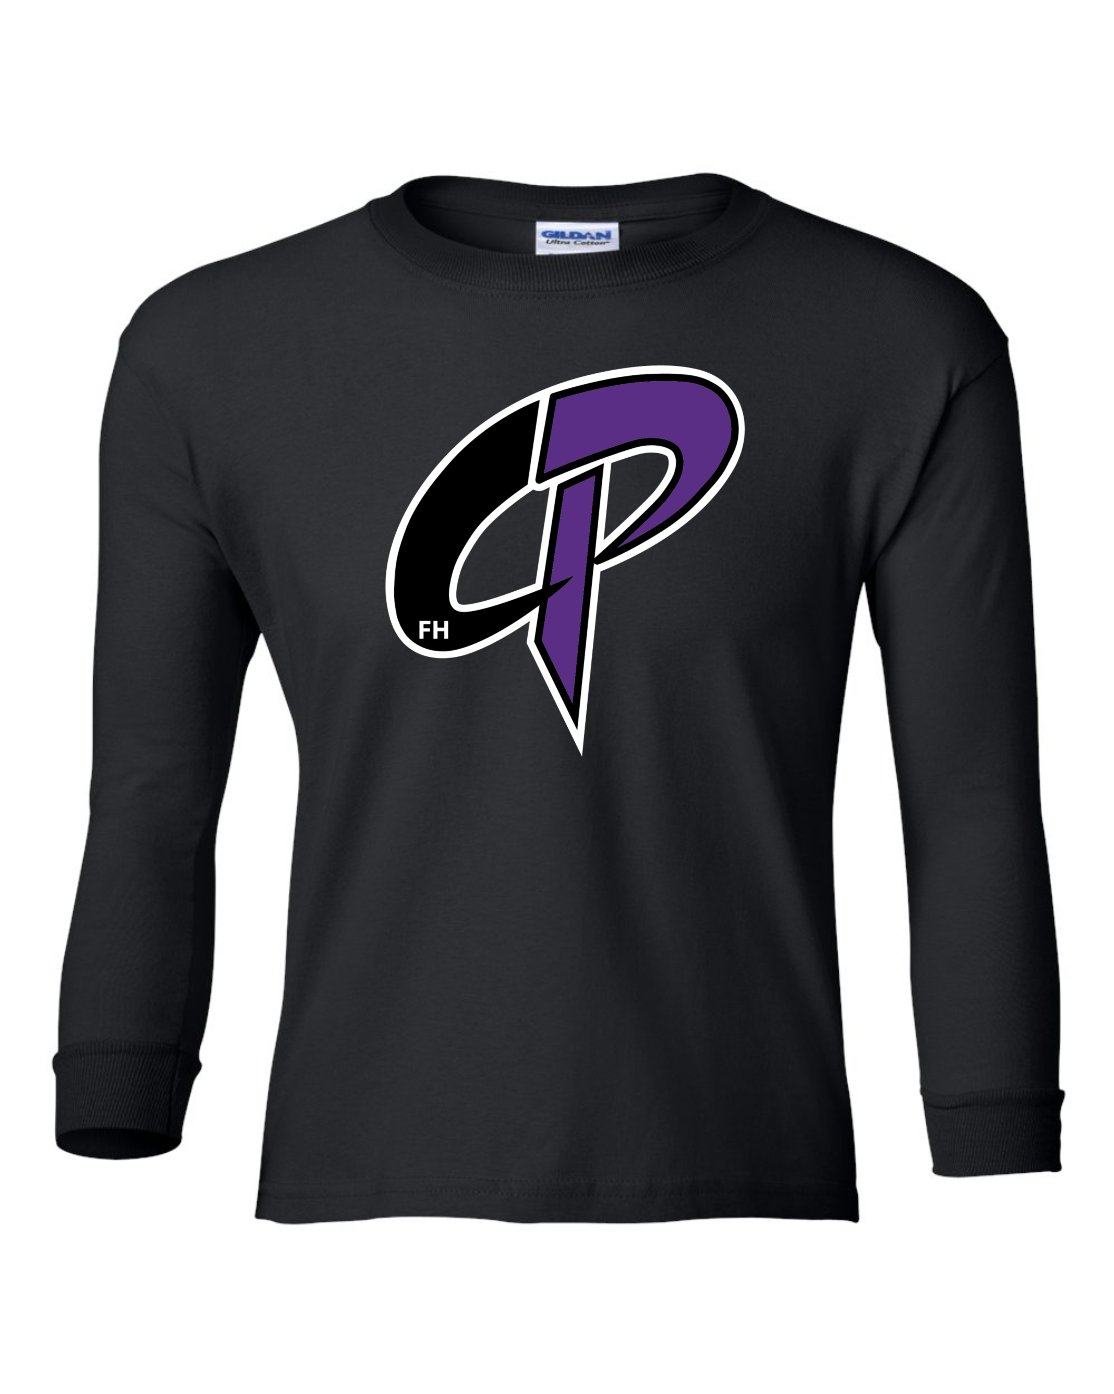 CPFH Standard Youth Cotton Long Sleeve Tee